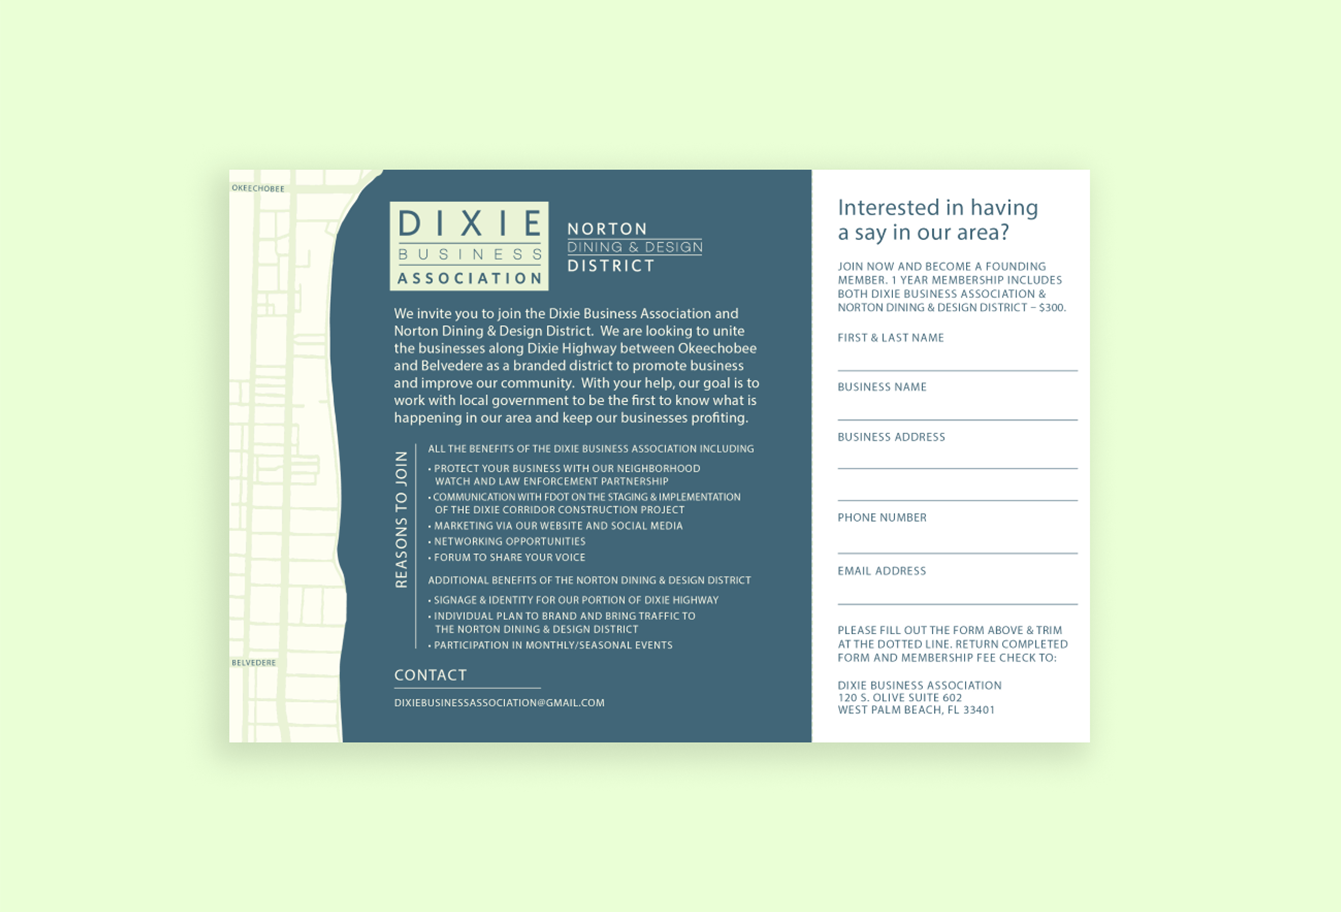 Flyer design for the Dixie Business Association featuring a map of the area, information about their association as well as details on how to join, and a form to fill out and mail back.